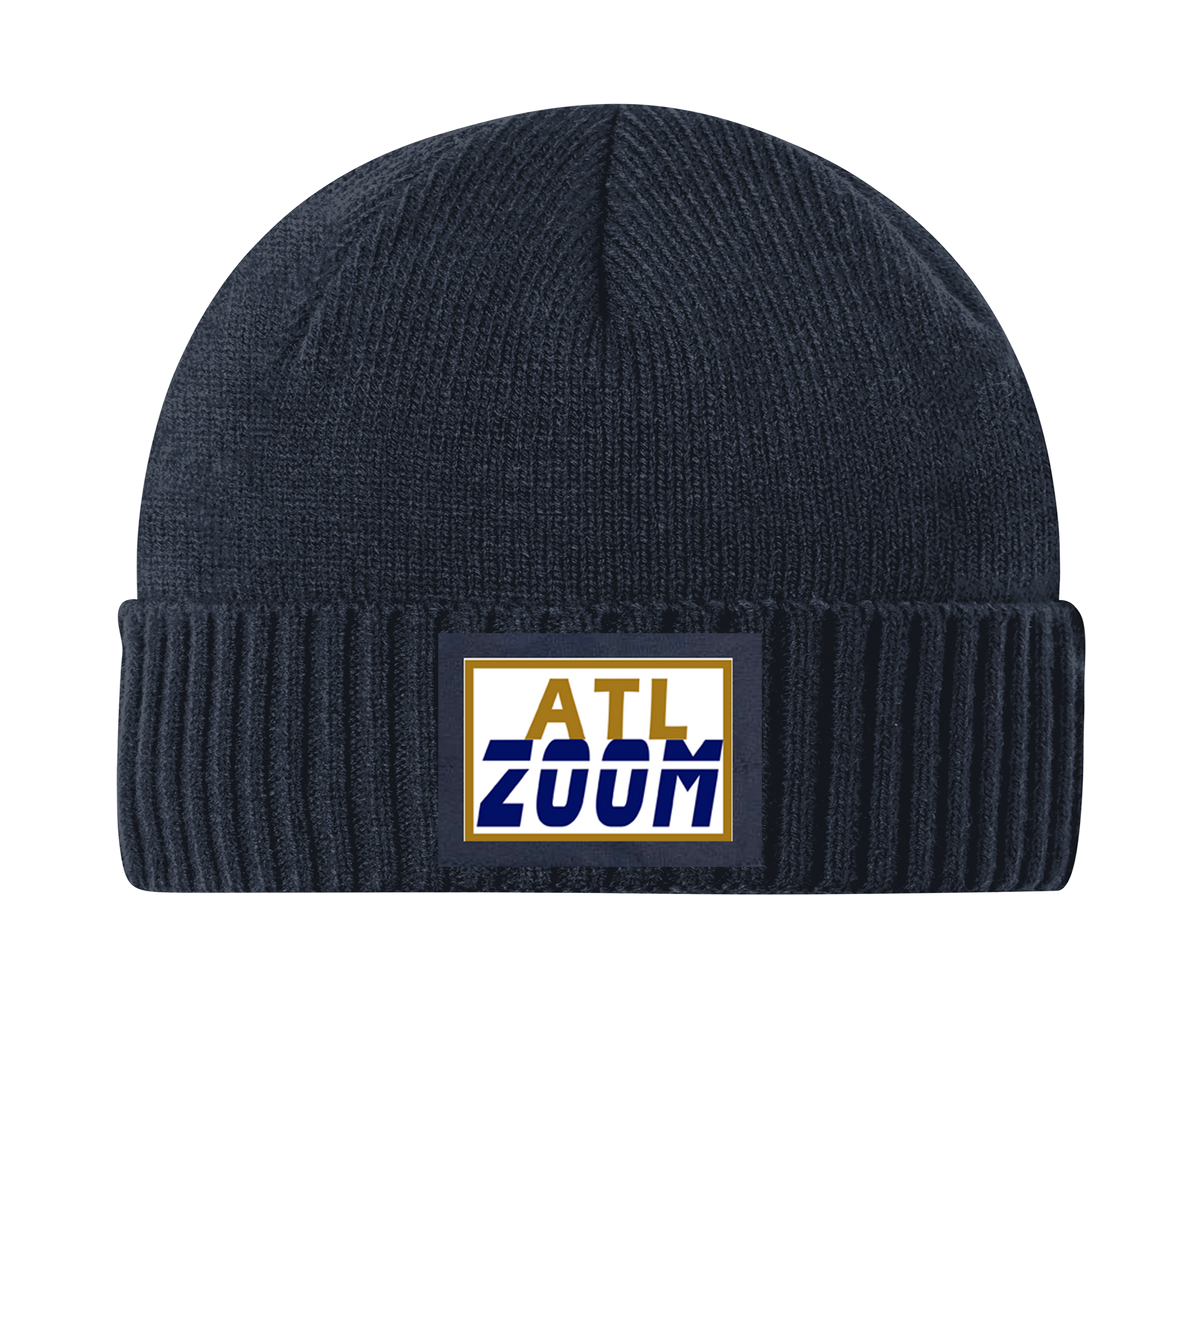 ATL ZOOM BEANIE Fair Shade Navy SQUARE PATCH_BLUE_GOLD_WHITE 